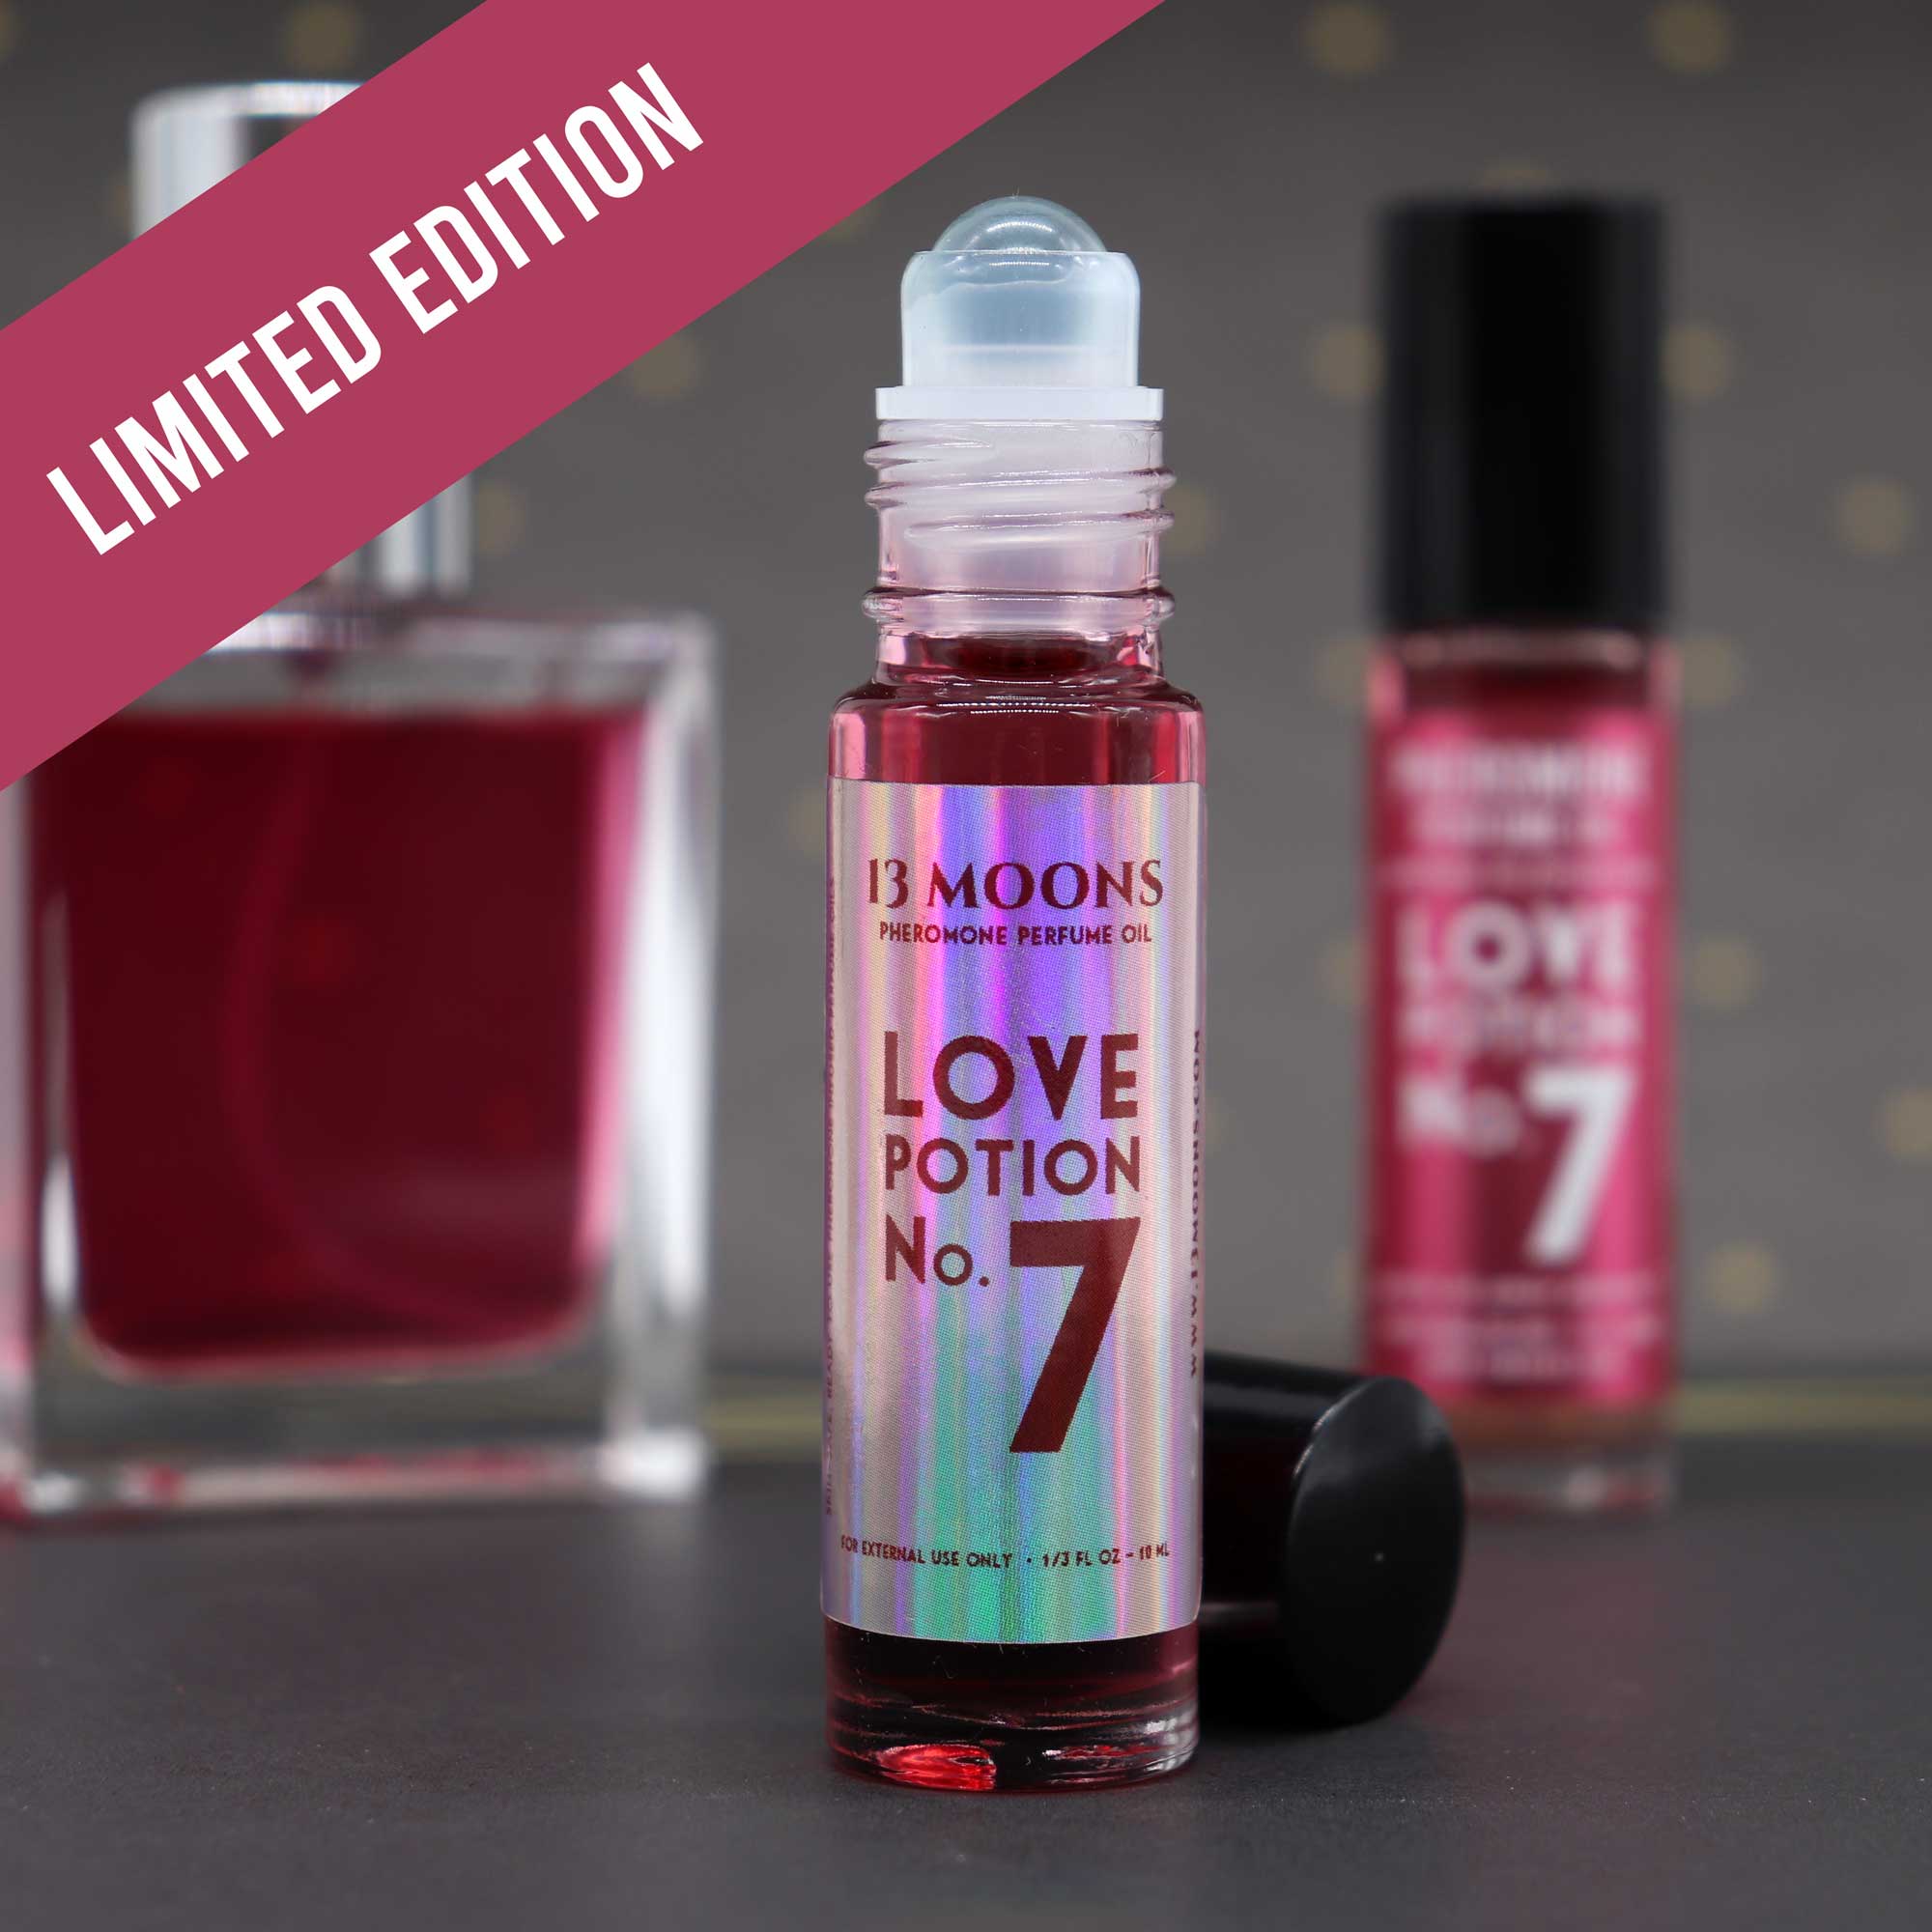 Love Potion Number 7 Pheromone - LIMITED EDITION - 13 Moons